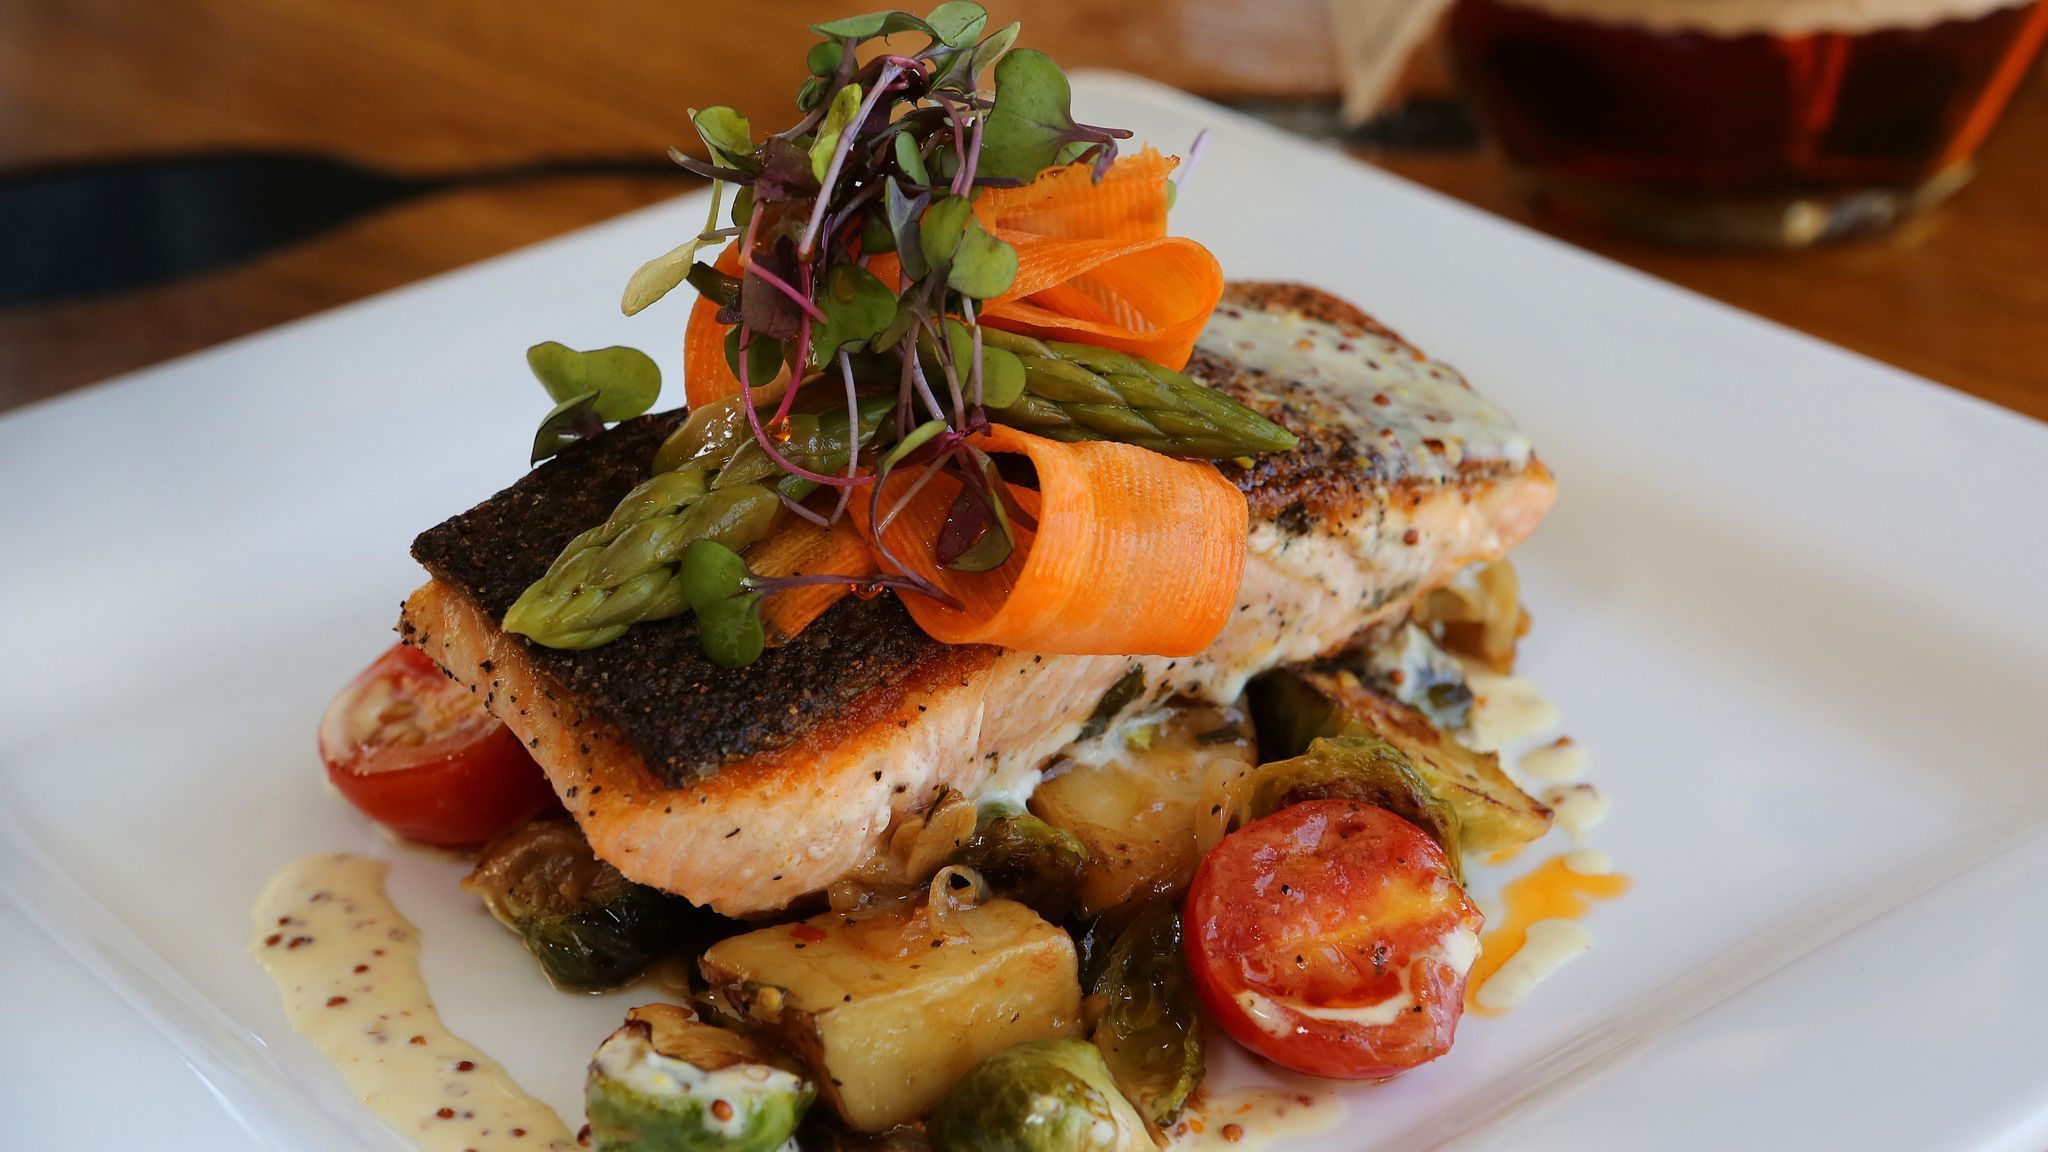 Pan-seared salmon at The Crooked Spoon in Clermont, Fl. Thursday, October 3, 2013. ( Tom Benitez/Orl